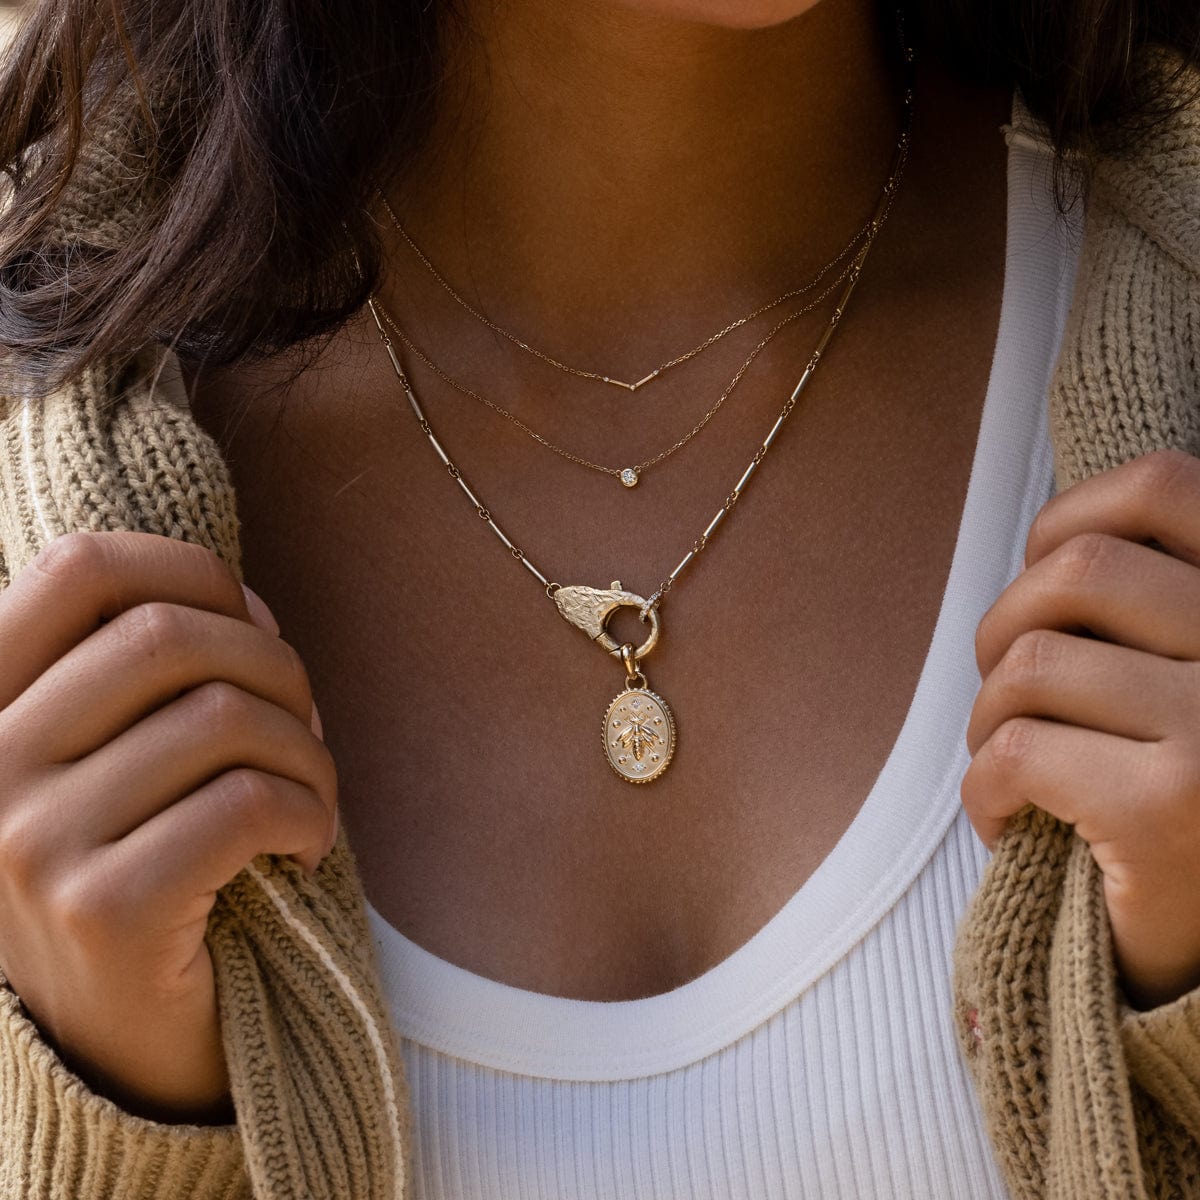 The Bee Medallion Necklace